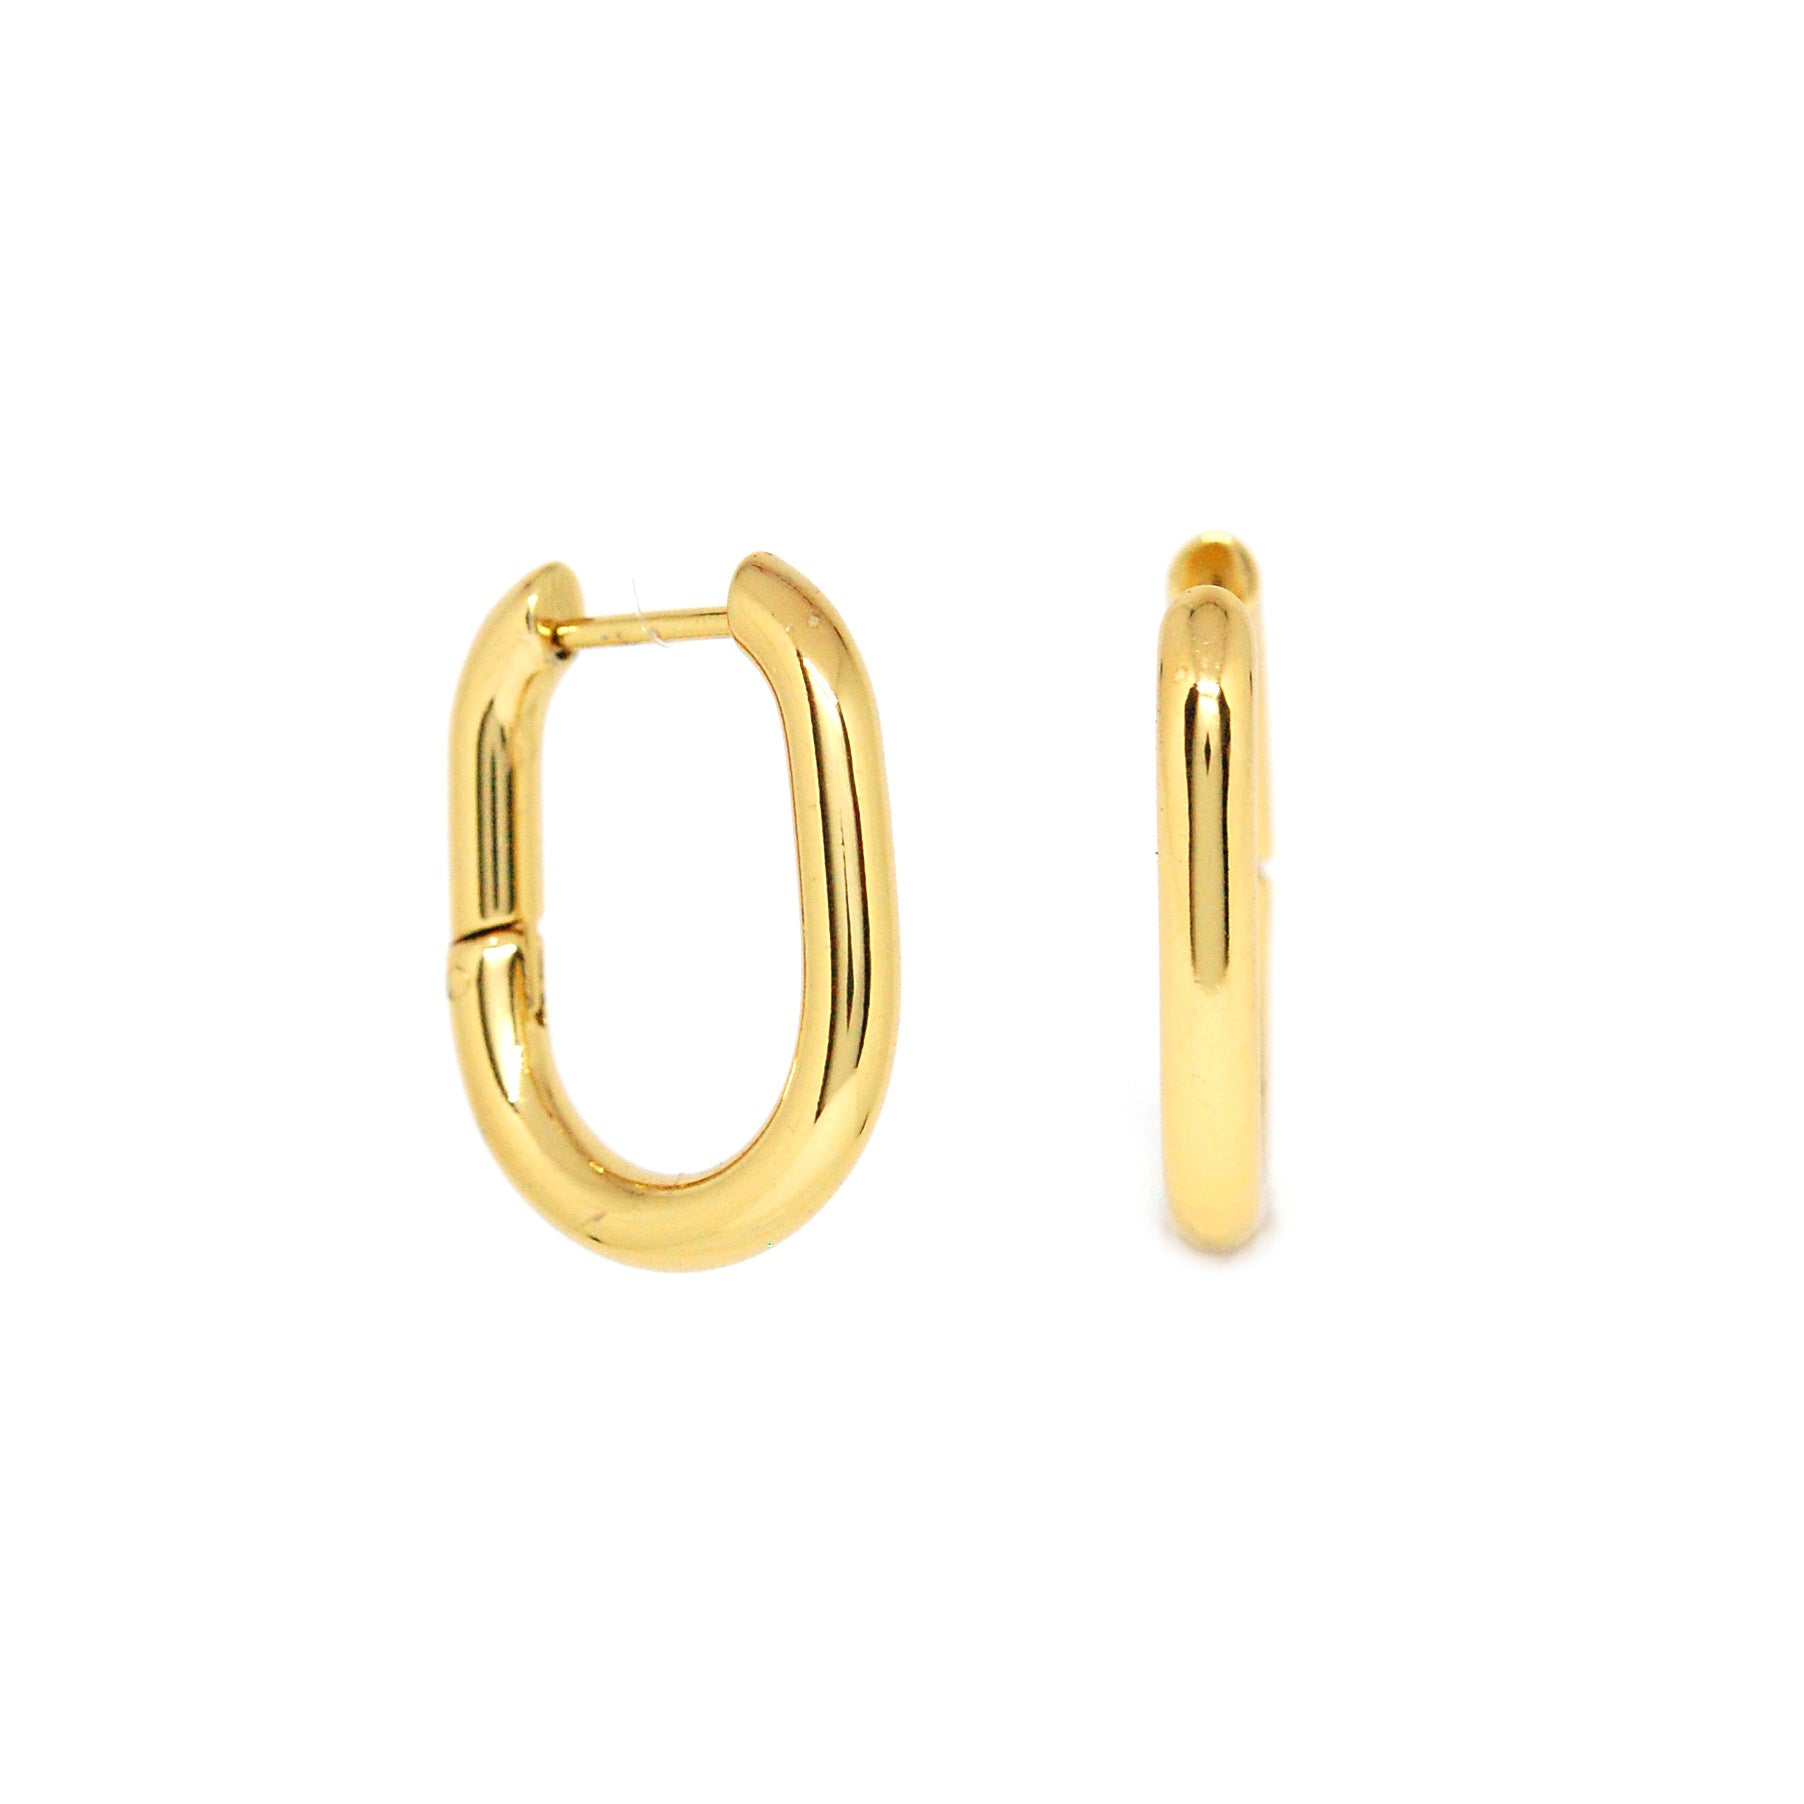 ESE 7878: All IPG Rounded Oval Outline Hoops